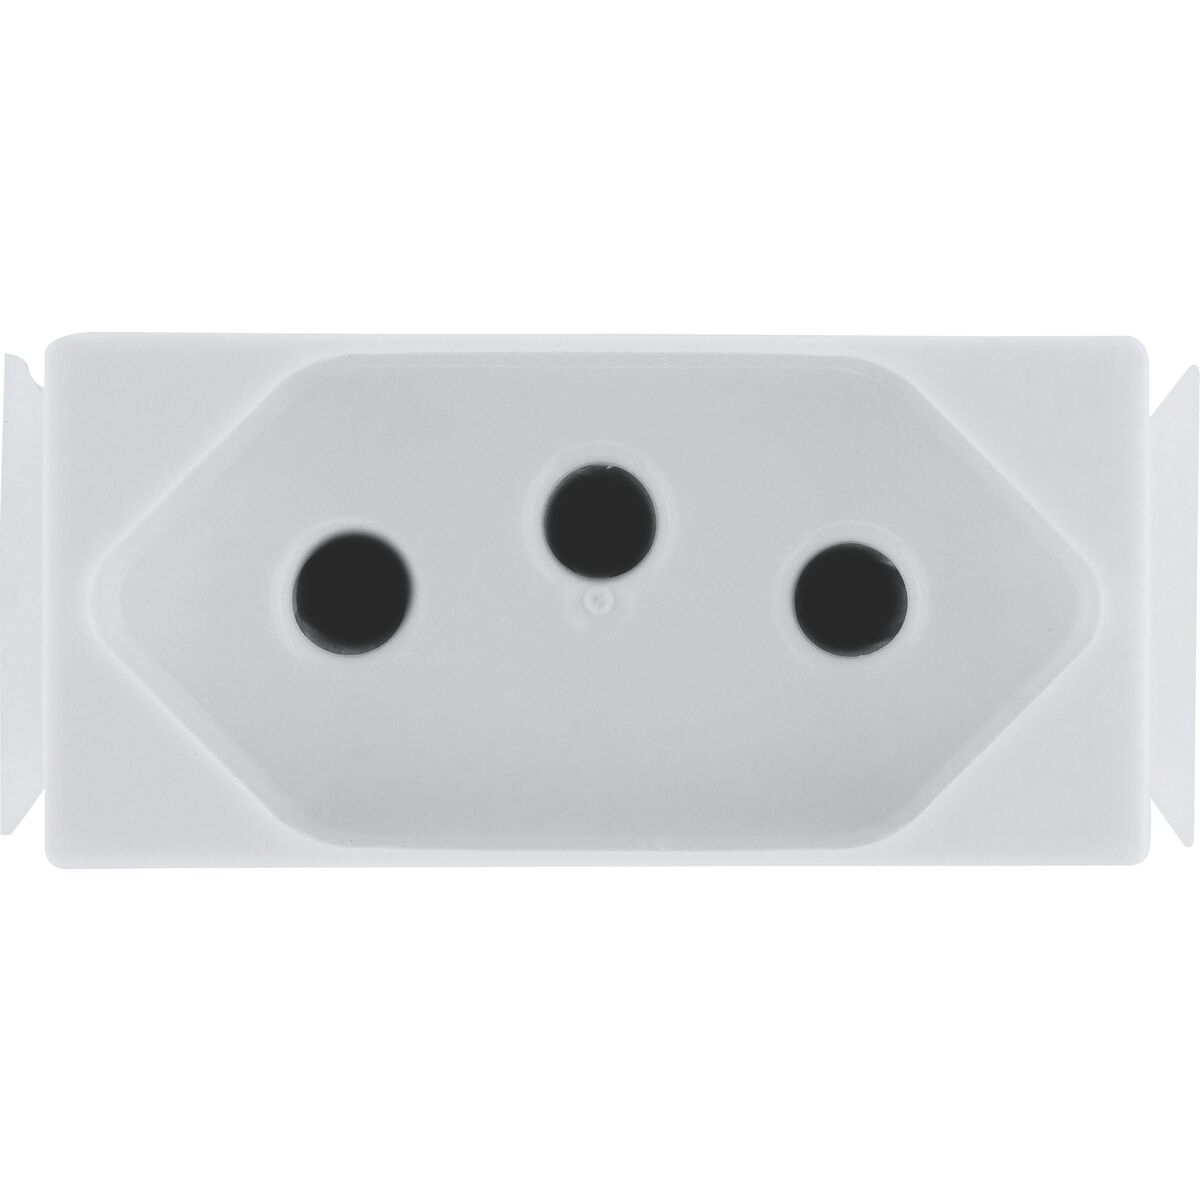 Tramontina Aria white 2P+T outlet, 20 A and 250 V